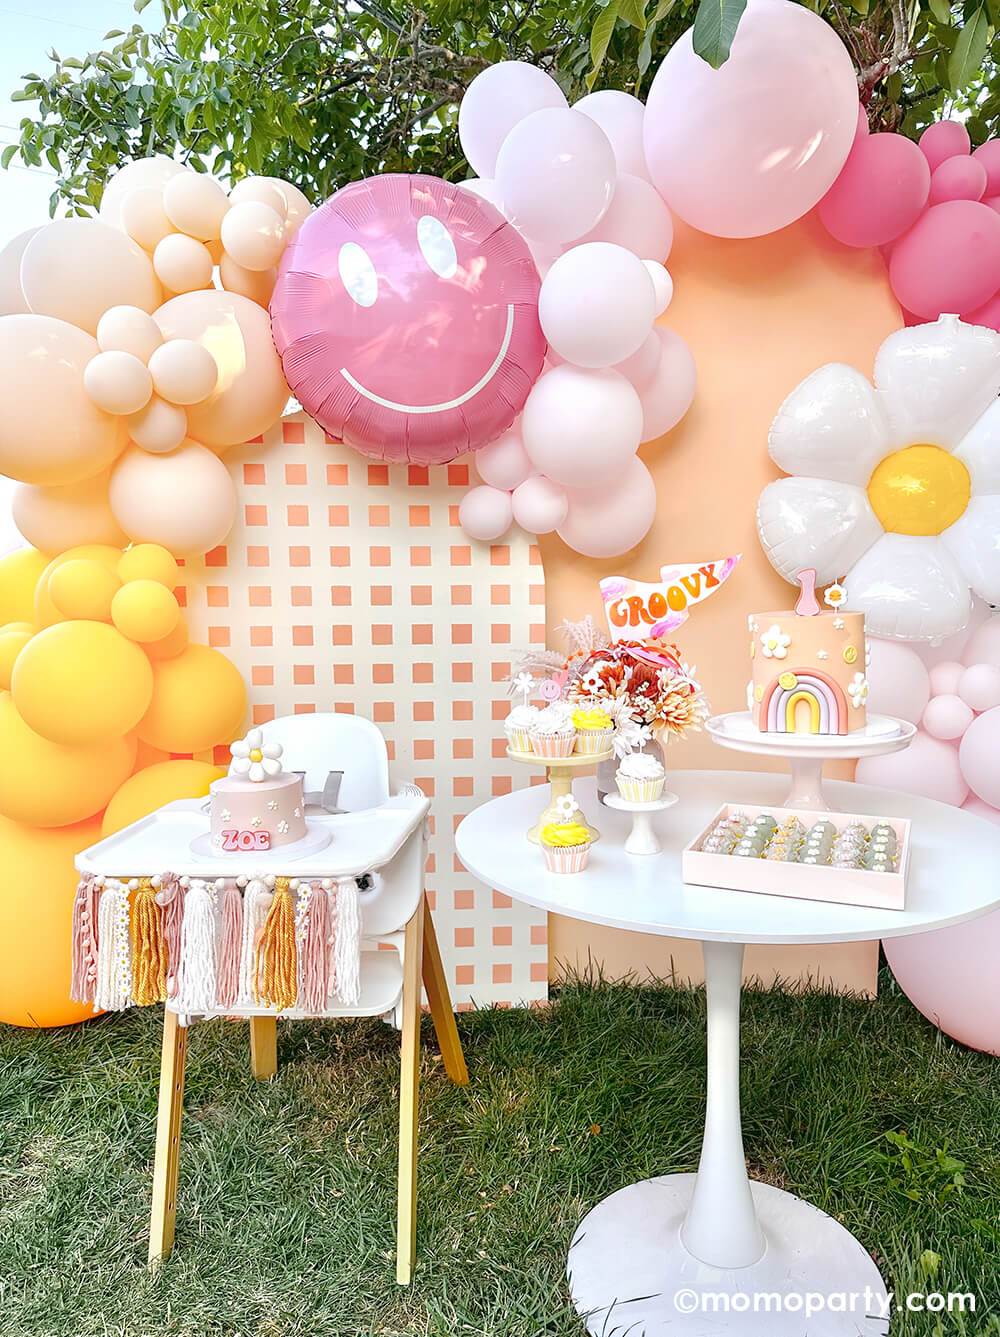 Momo Party’s “One Groovy Baby” First Birthday Party. This outdoor backyard party is decorated with a check-patterned wooden Backdrop board, a 30" Rosy Smiley face foil balloon, a Daisy Foil Mylar Balloon, and latex balloon clusters in peach, pink, and Goldenrod colors. A smash cake with a daisy flower on the Stokke high chair, decorated with Boho Daisy Yarn tassel Banner, on the right side there are birthday cake with a number one topper, Daisy Birthday Candle, Groovy Party Pennant inside the flower vase